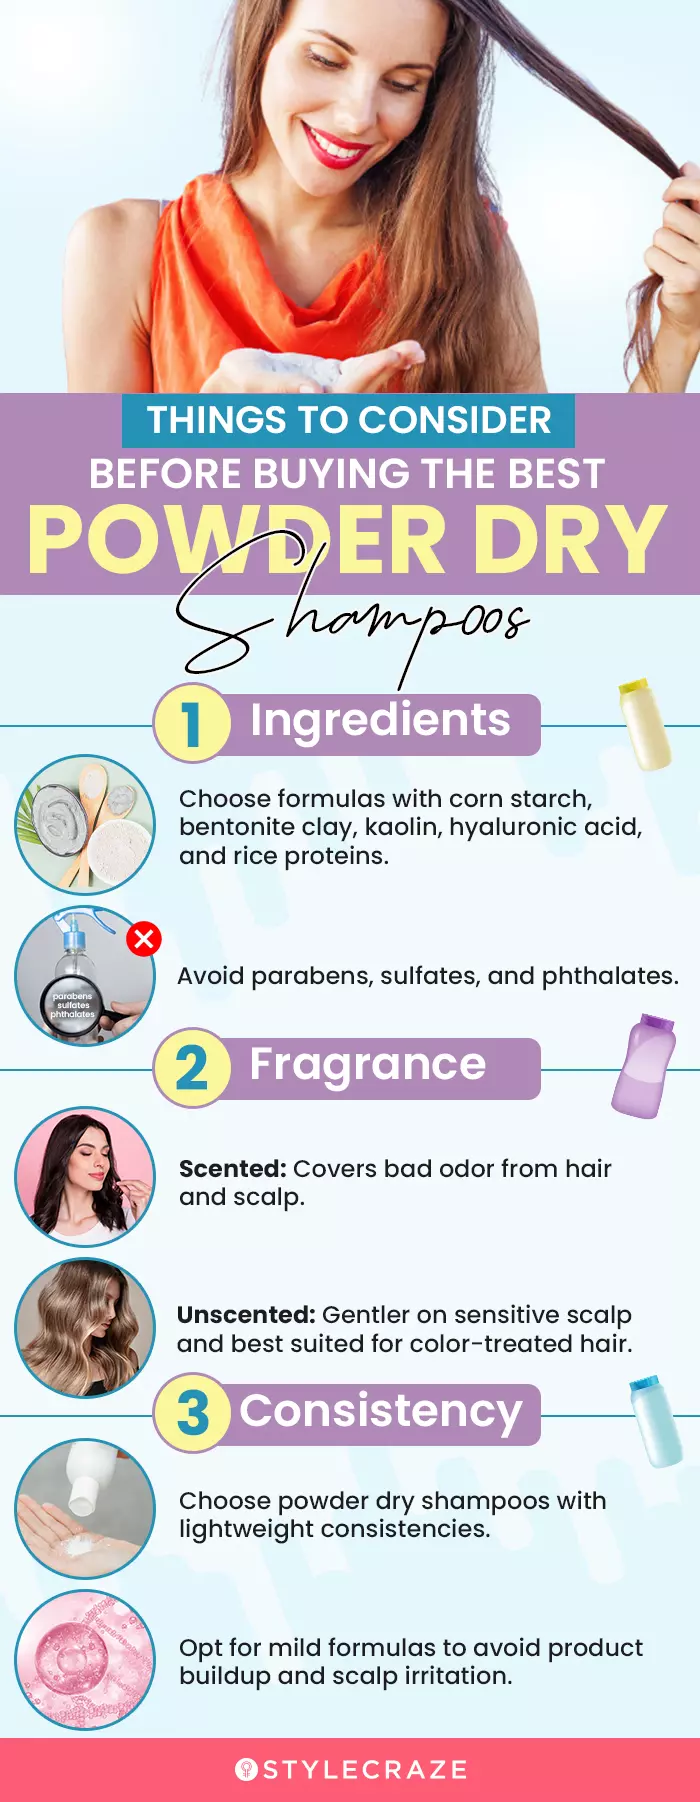 How To Apply A Dry Shampoo (infographic)